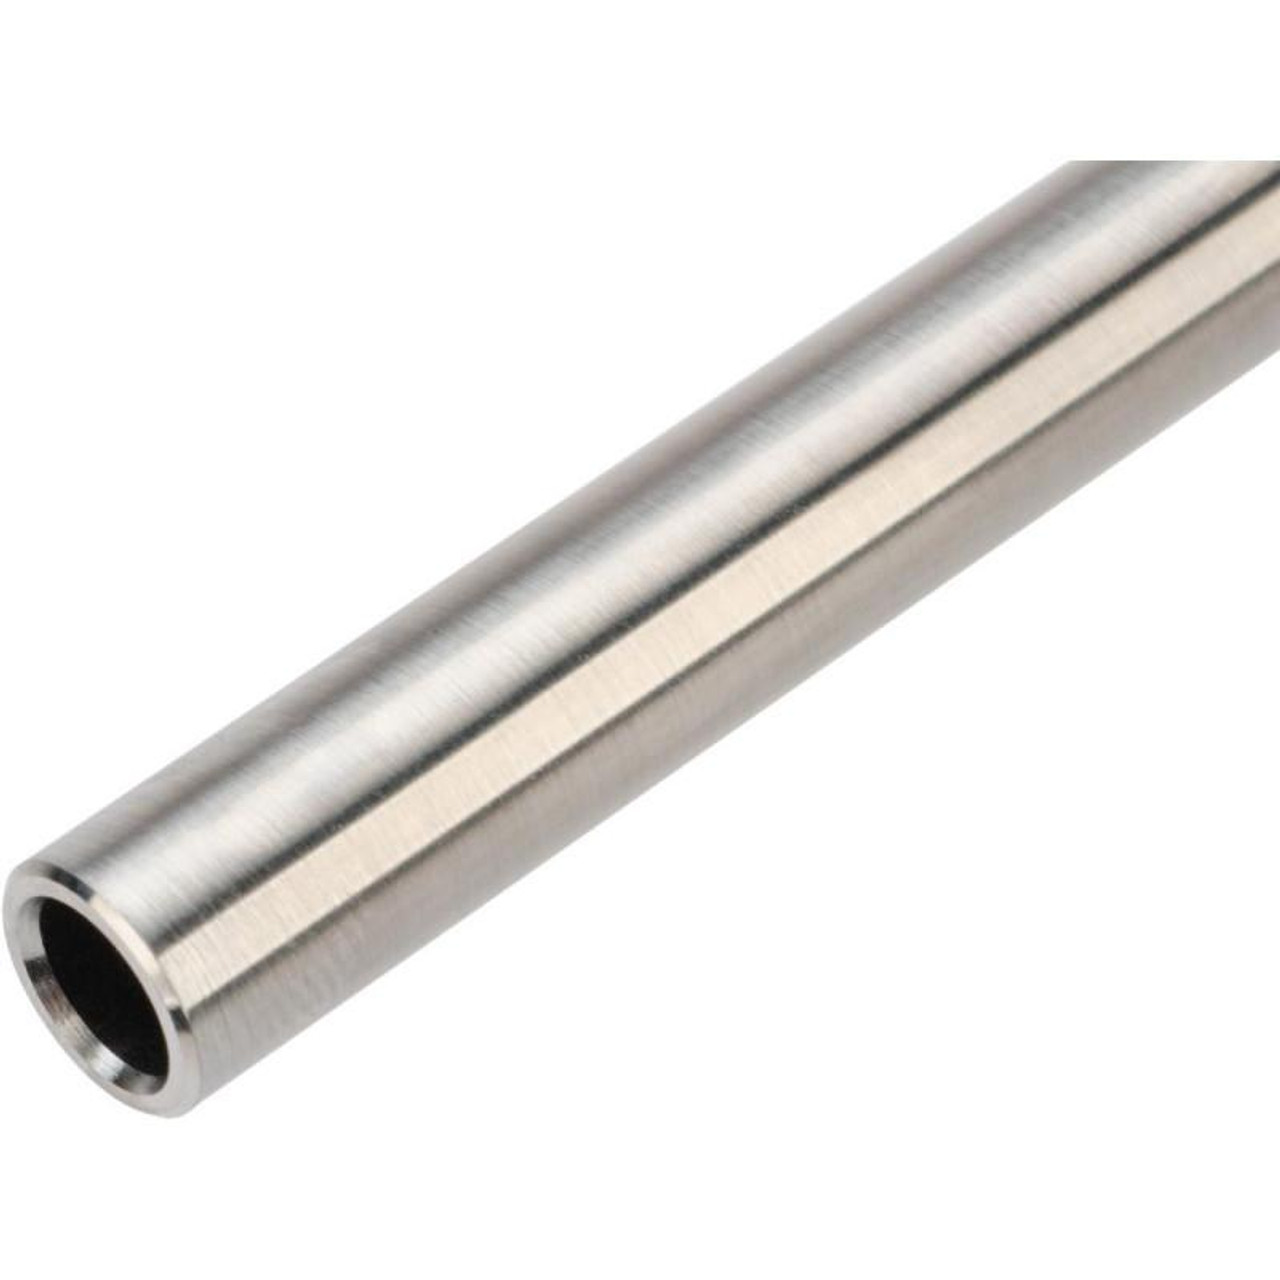 Lambda "ONE" Precision Stainless Steel 6.01mm Tight Bore Inner Barrel for Tokyo Marui Spec AEPs (Length: 135mm / MAC10)